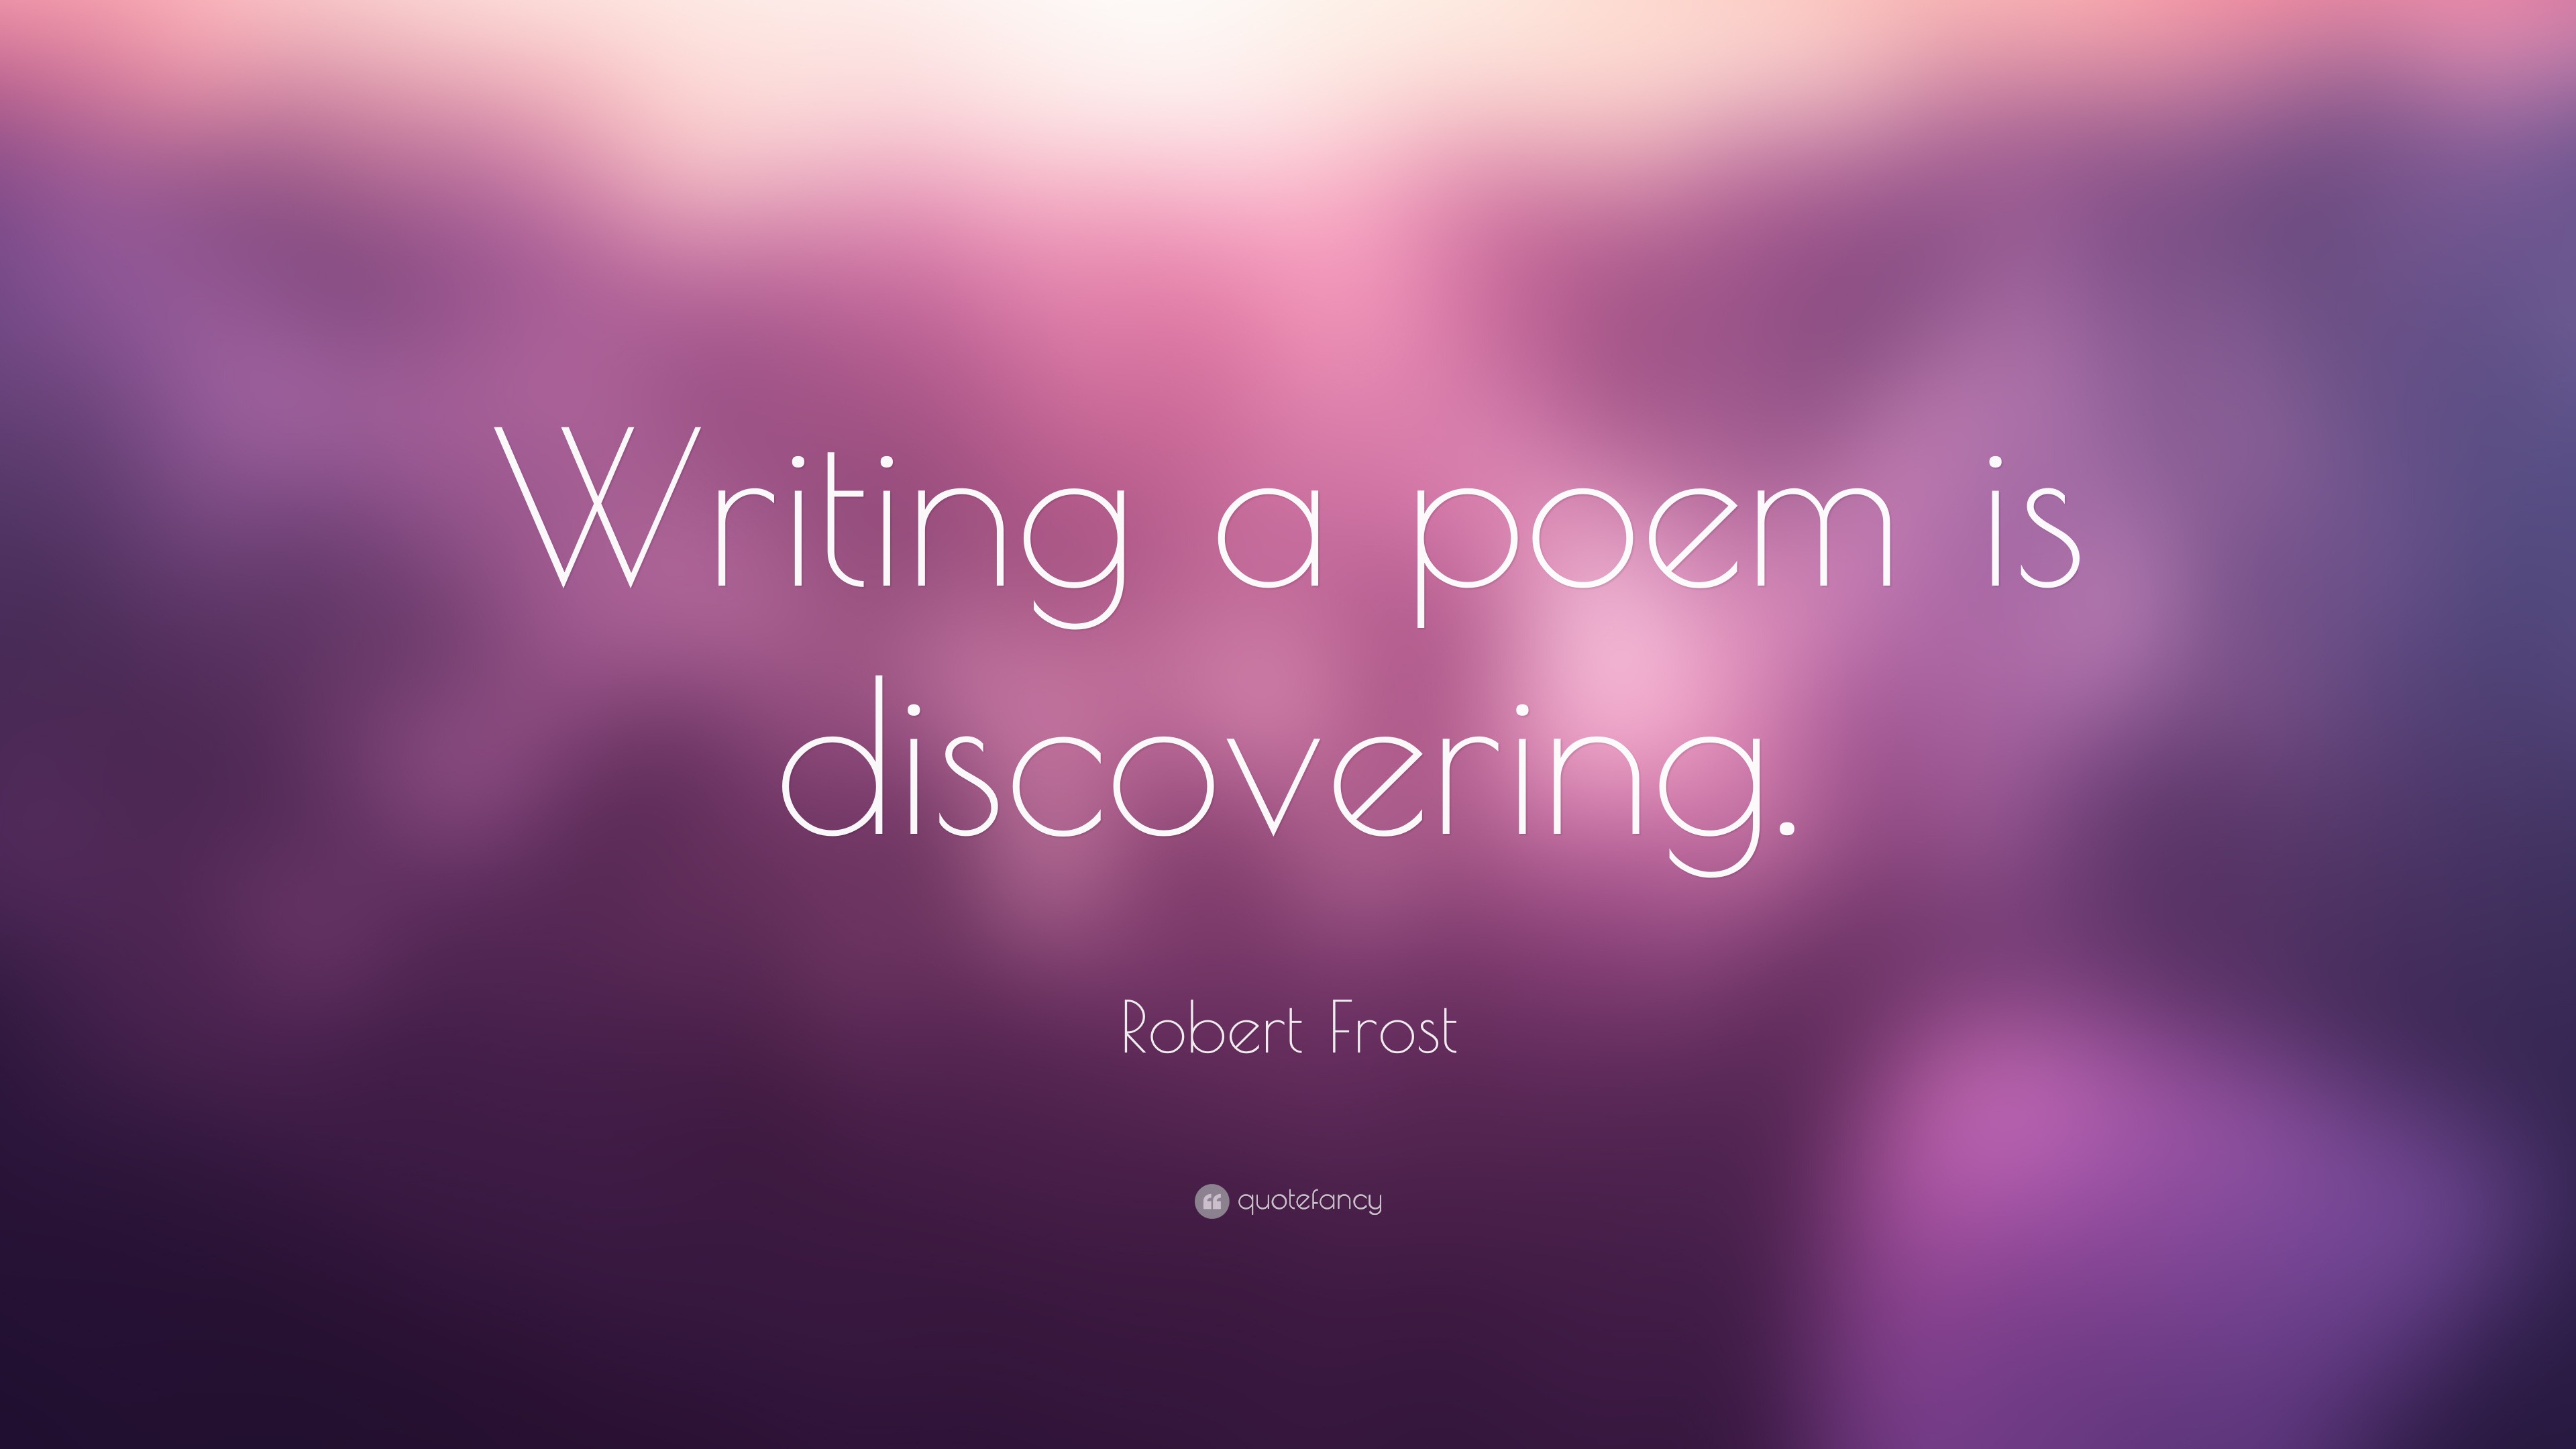 Robert Frost Quote: “Writing a poem is discovering.”